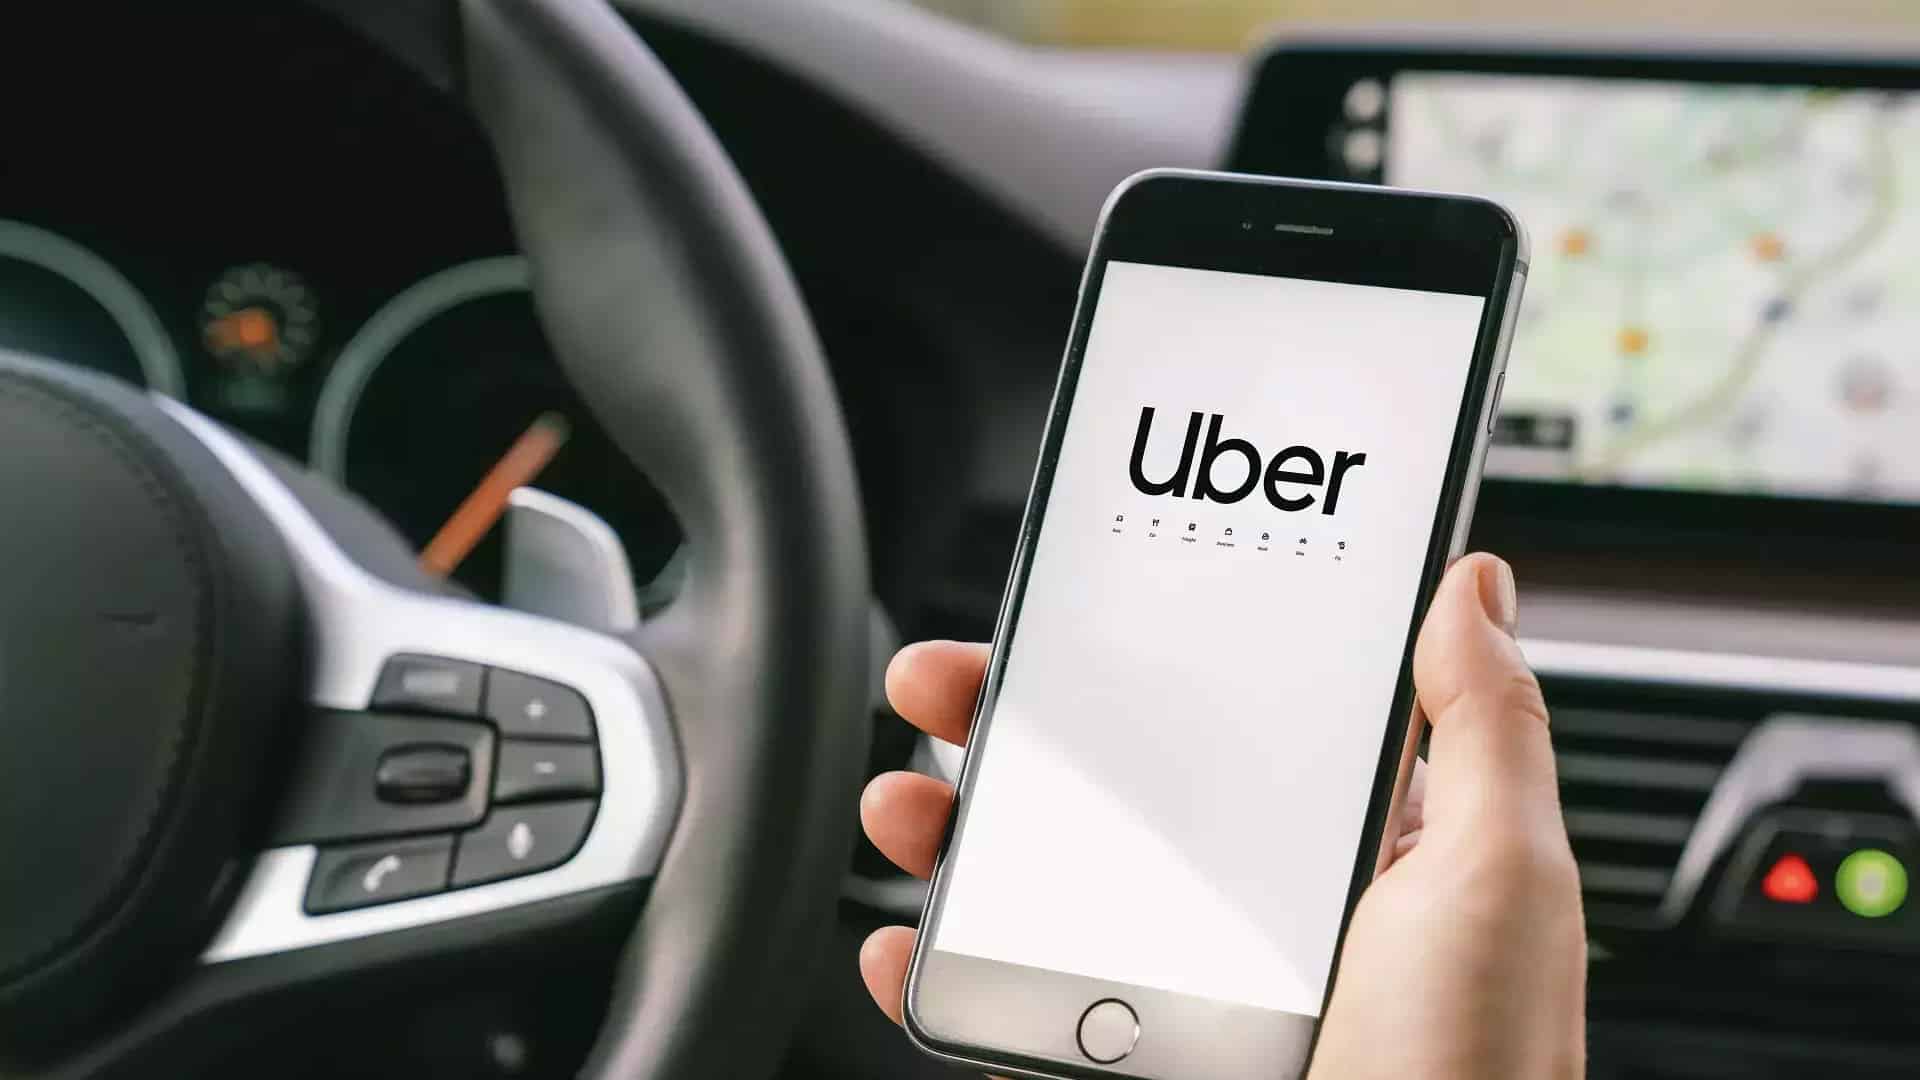 Uber completes 10 yrs in India; says drivers earned over Rs 50,000 cr via platform since 2013